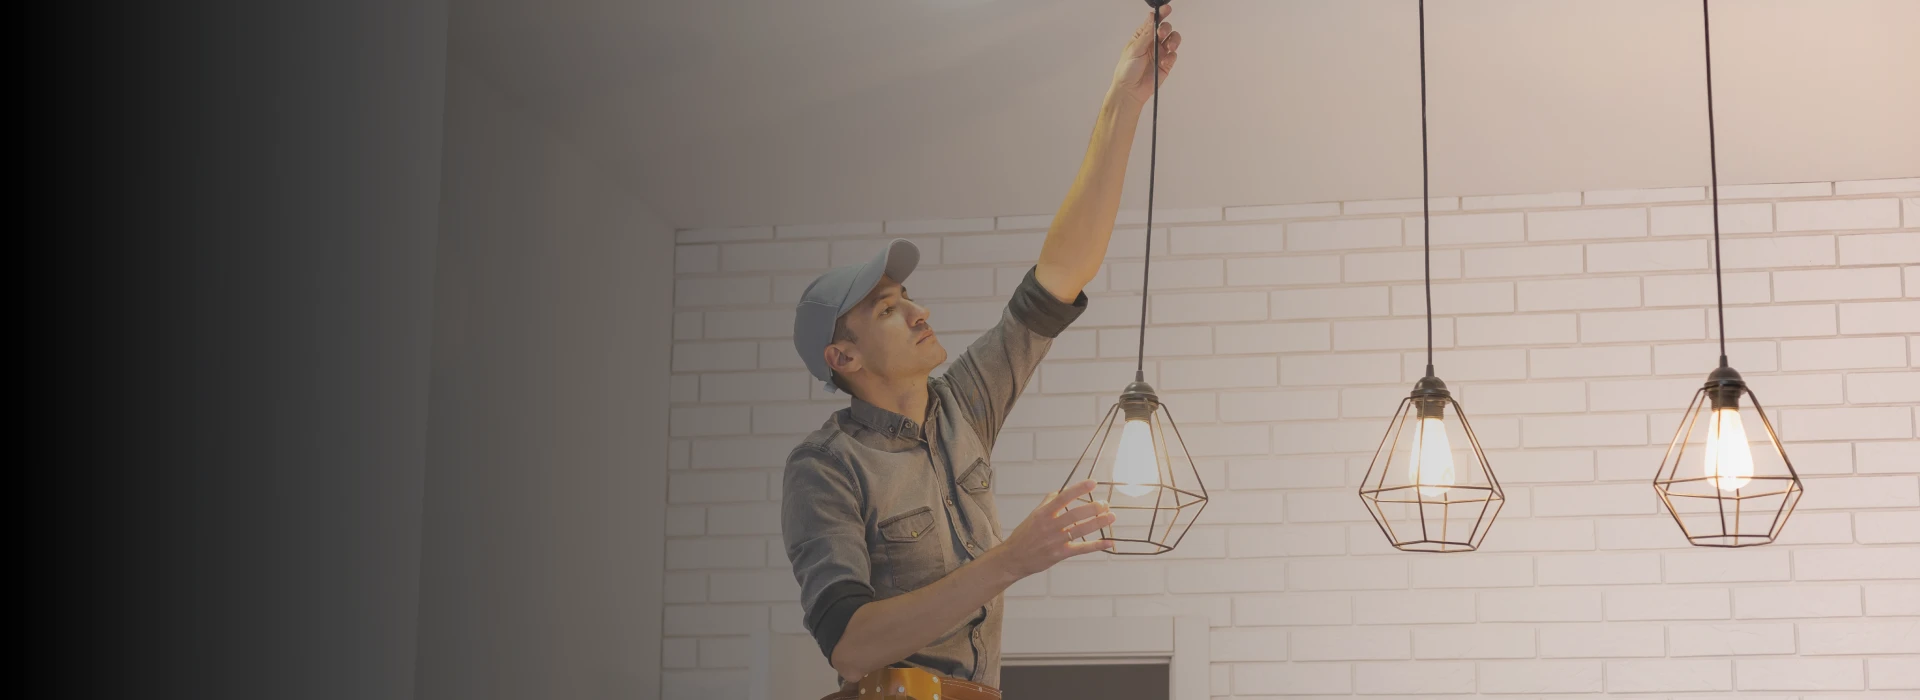 When it comes to residential Electrical Contracting in Burnaby, PTX Electric is your reliable partner